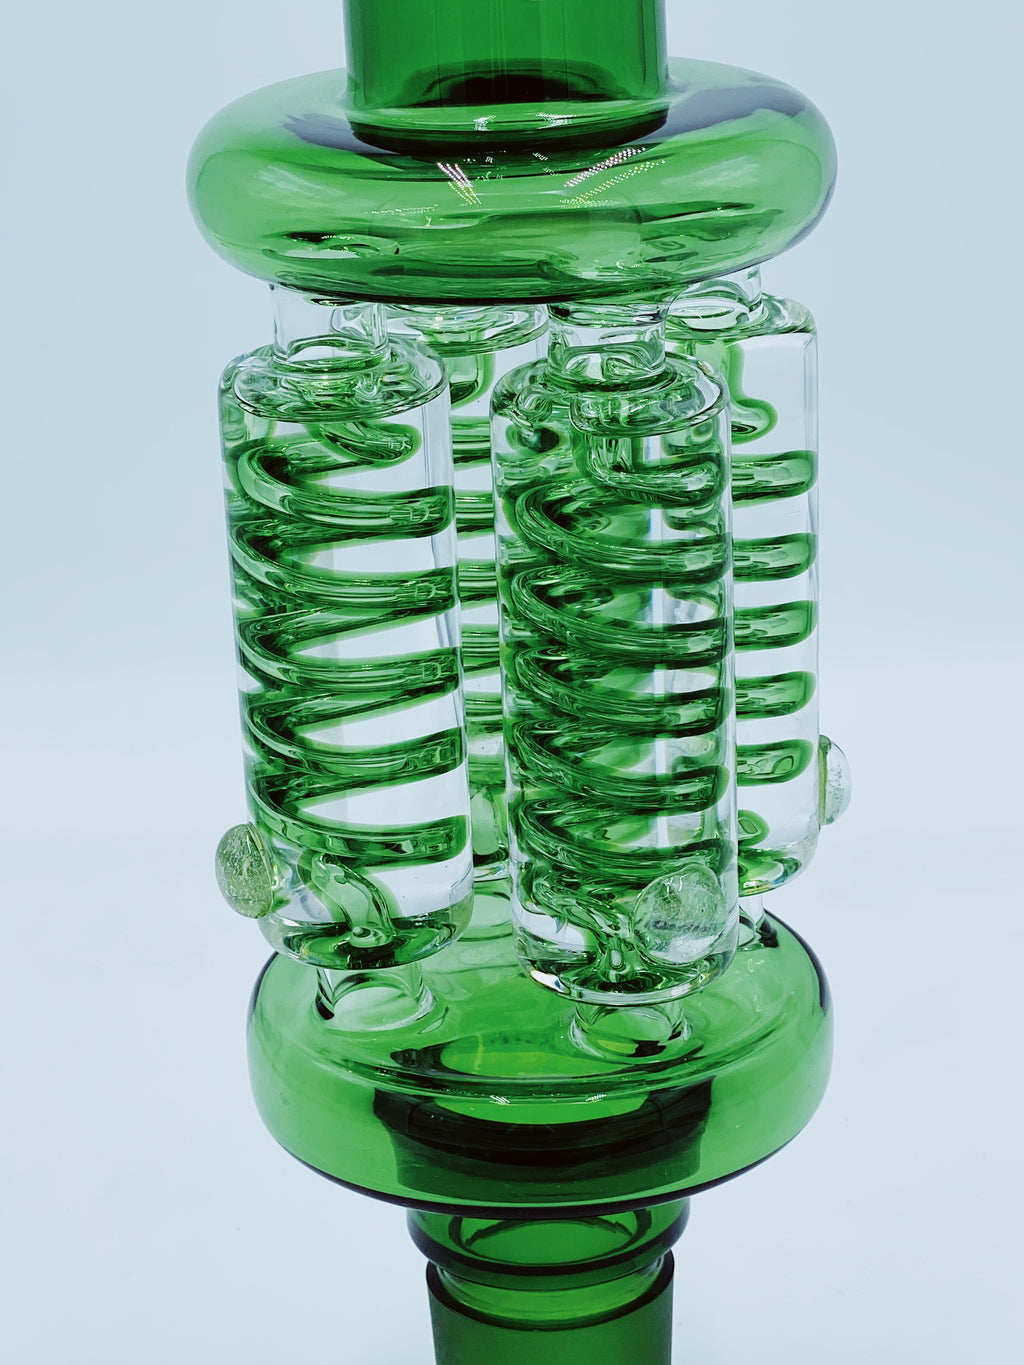 CHEECH GLASS QUAD FREEABLE COIL TOP PIECE - Smoke Country - Land of the artistic glass blown bongs